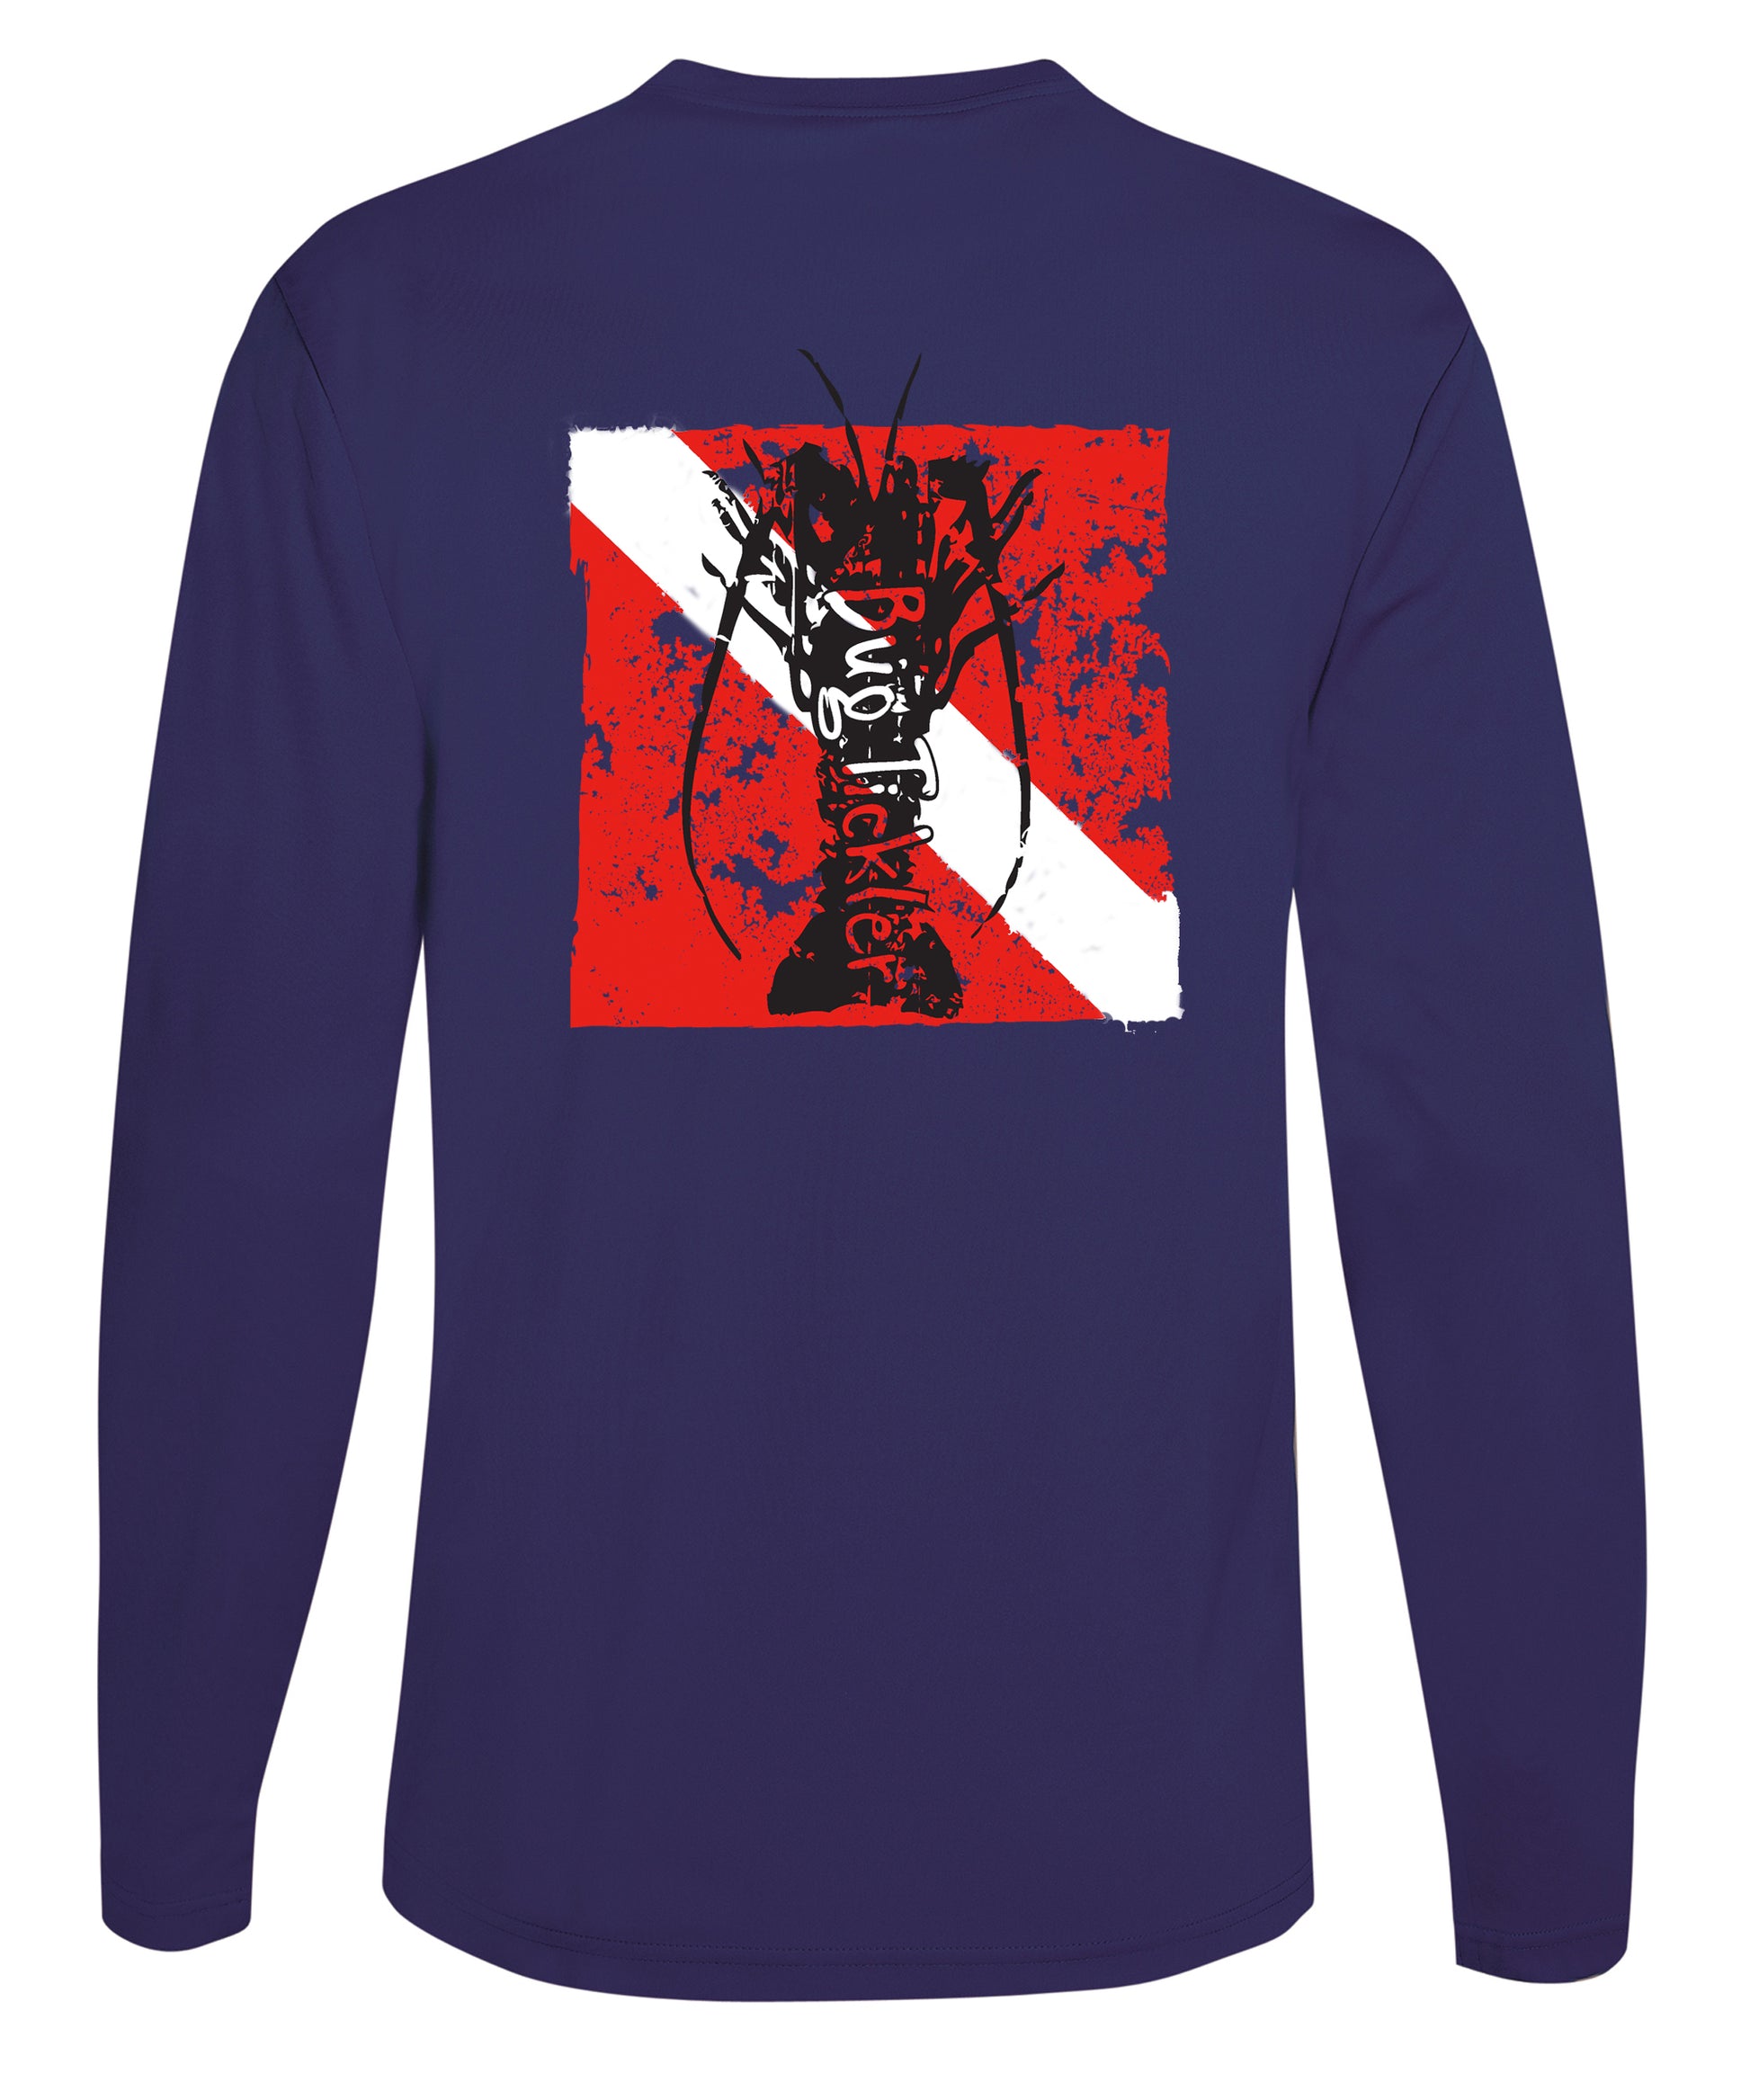 Lobster Performance Dry-Fit Fishing shirts with Sun Protection - "Bug Tickler" Dive Logo - Navy Long Sleeve